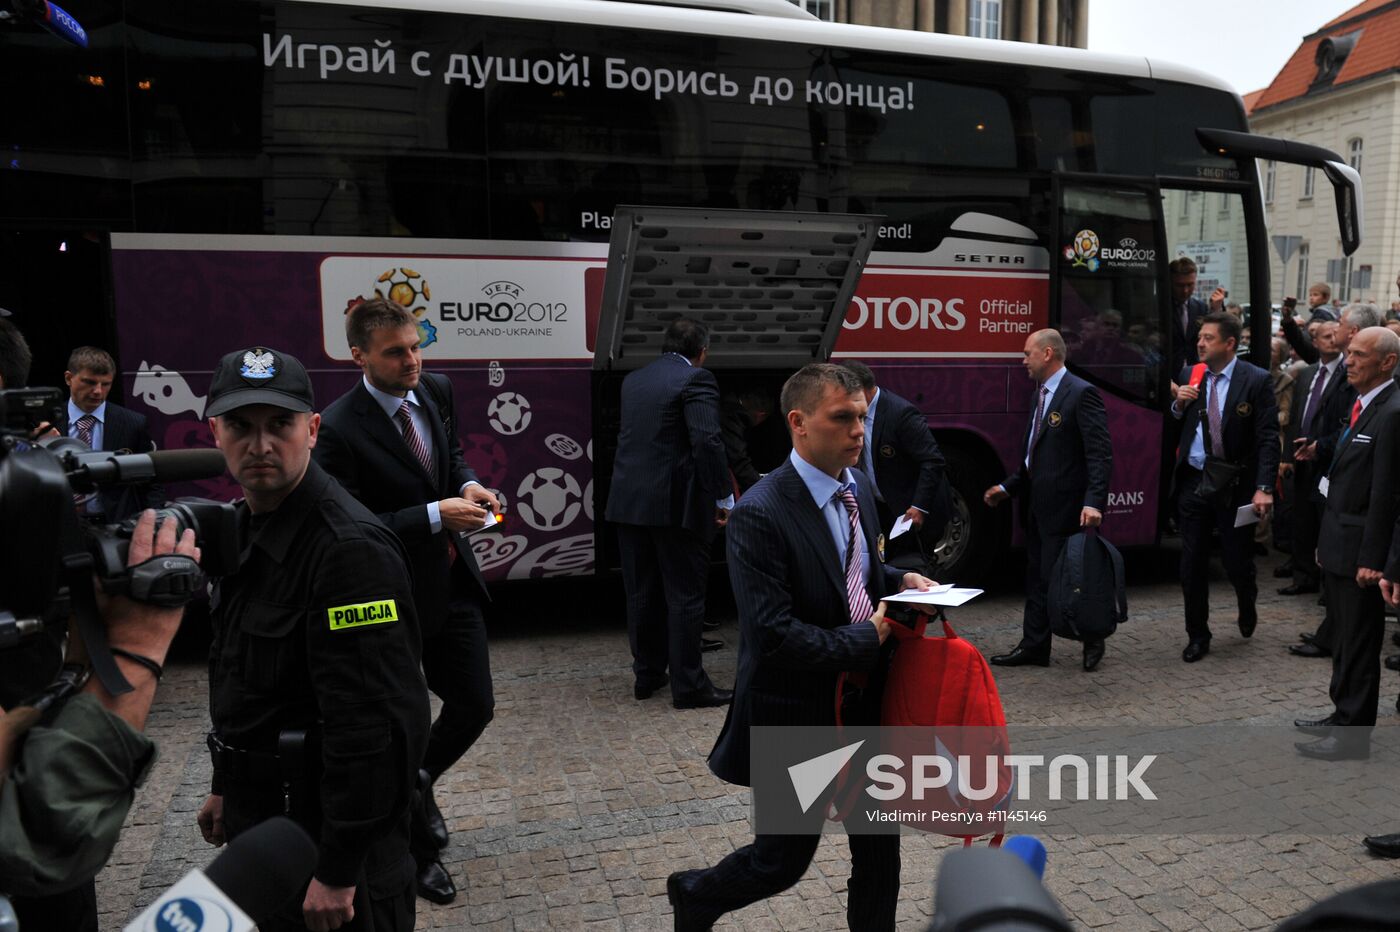 Russian national football team arrive in Warsaw